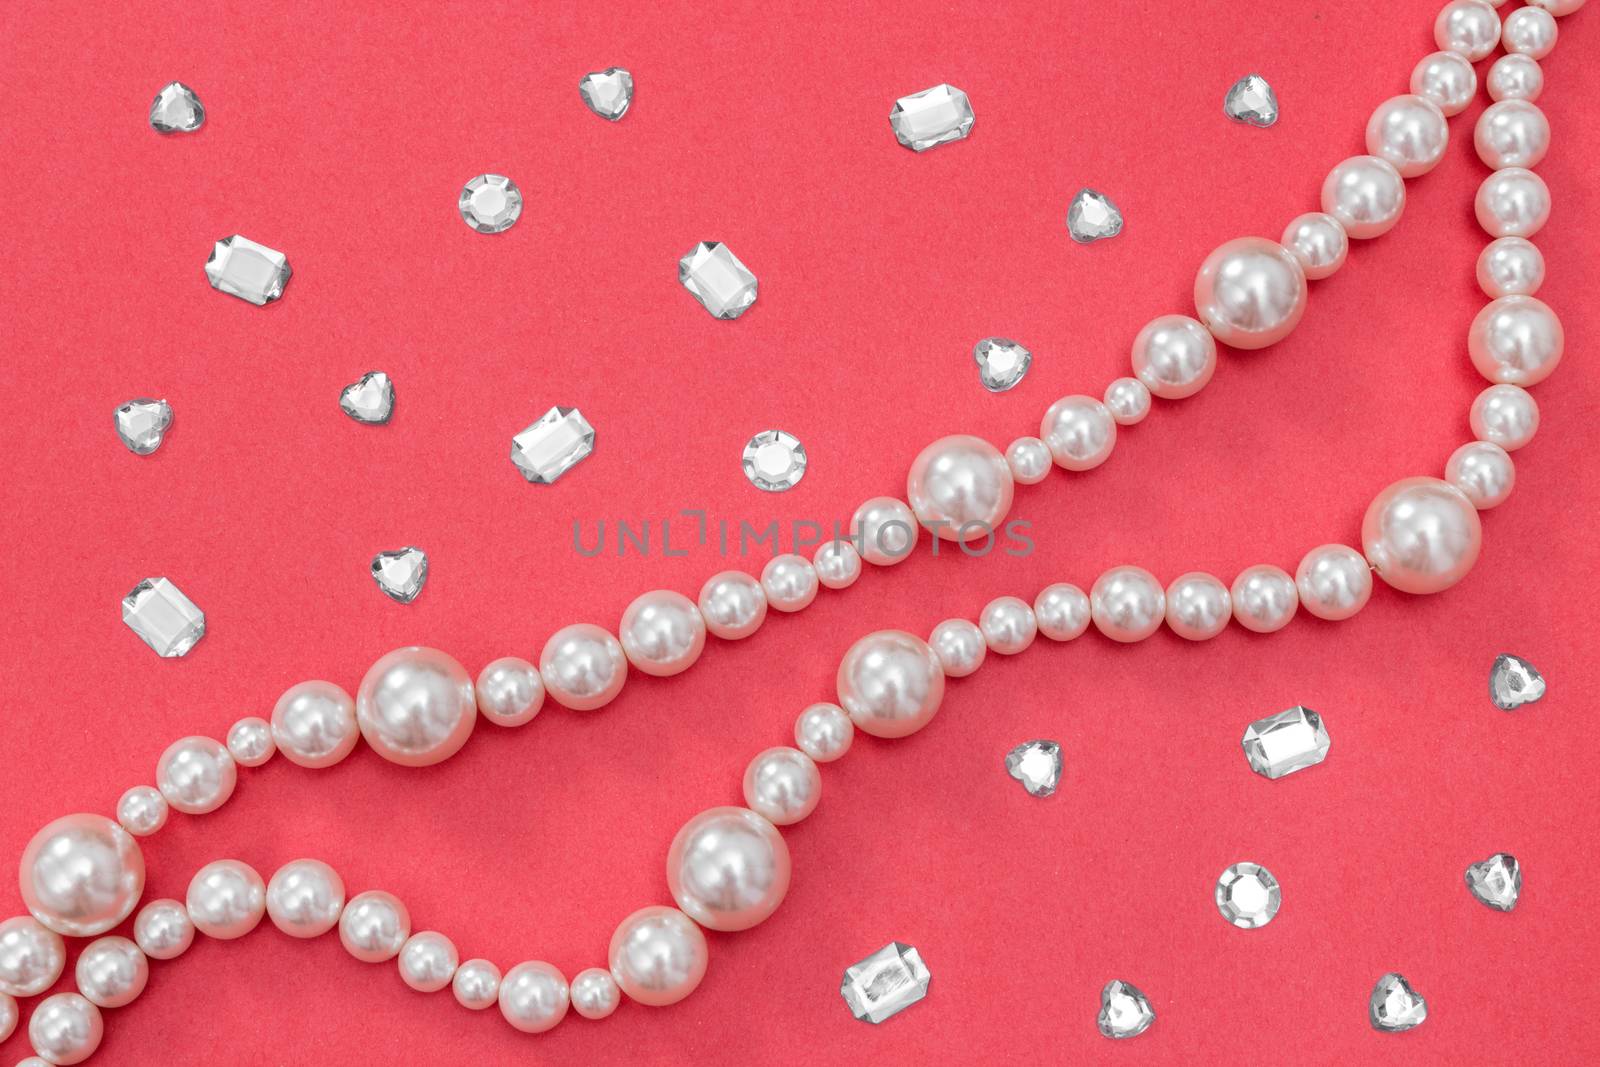 Pearl necklace and shiny gems on pink background by anikasalsera